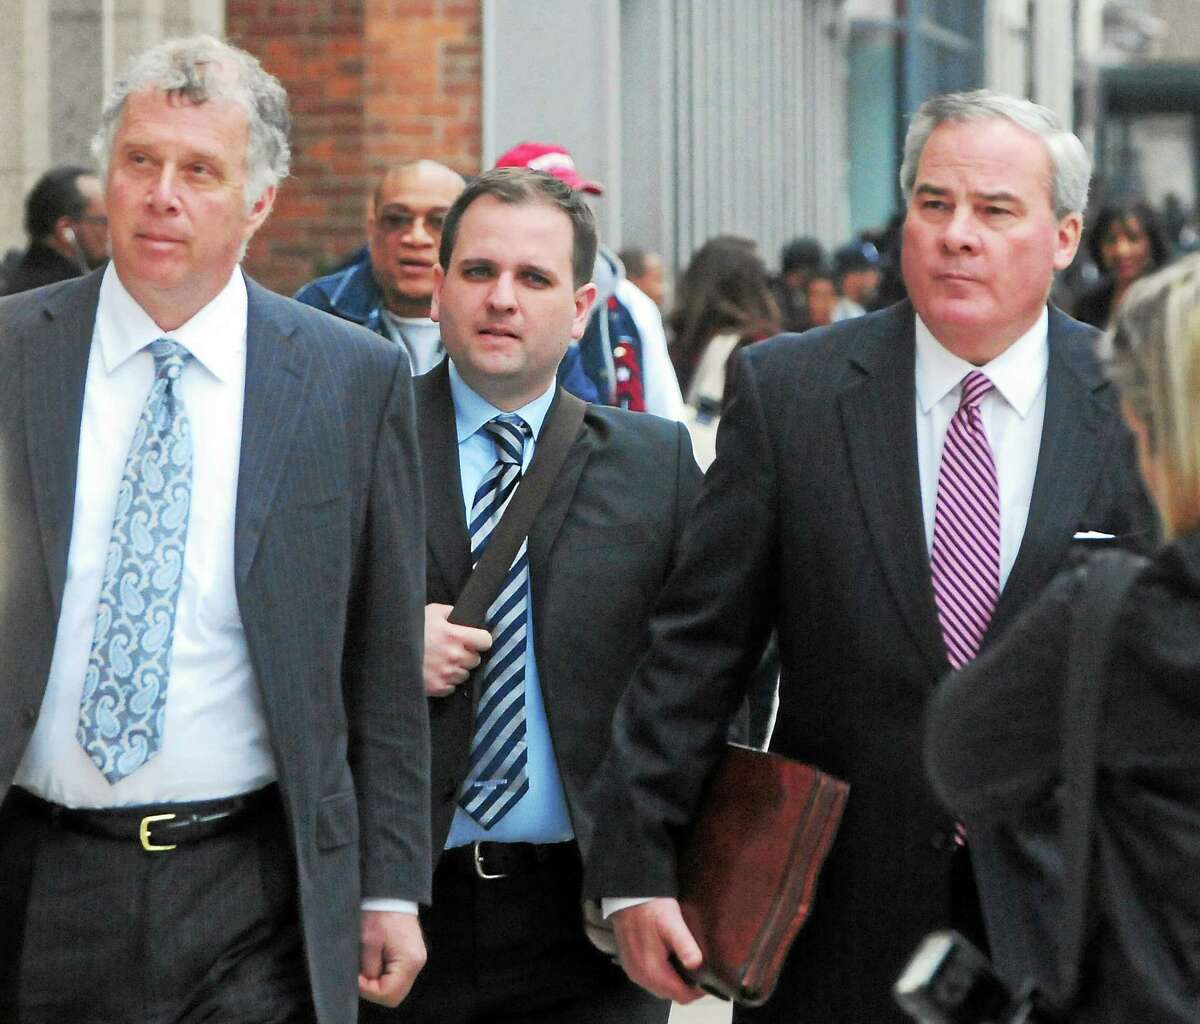 Former Connecticut Governor John G. Rowland, right, arrives with his attorney Reid Weingarten, far left, at the Federal Courthouse in New Haven Friday afternoon, April 11, 2014 to face a seven-count indictment a campaign fraud investigation in Connecticut’s 5th Congressional District.